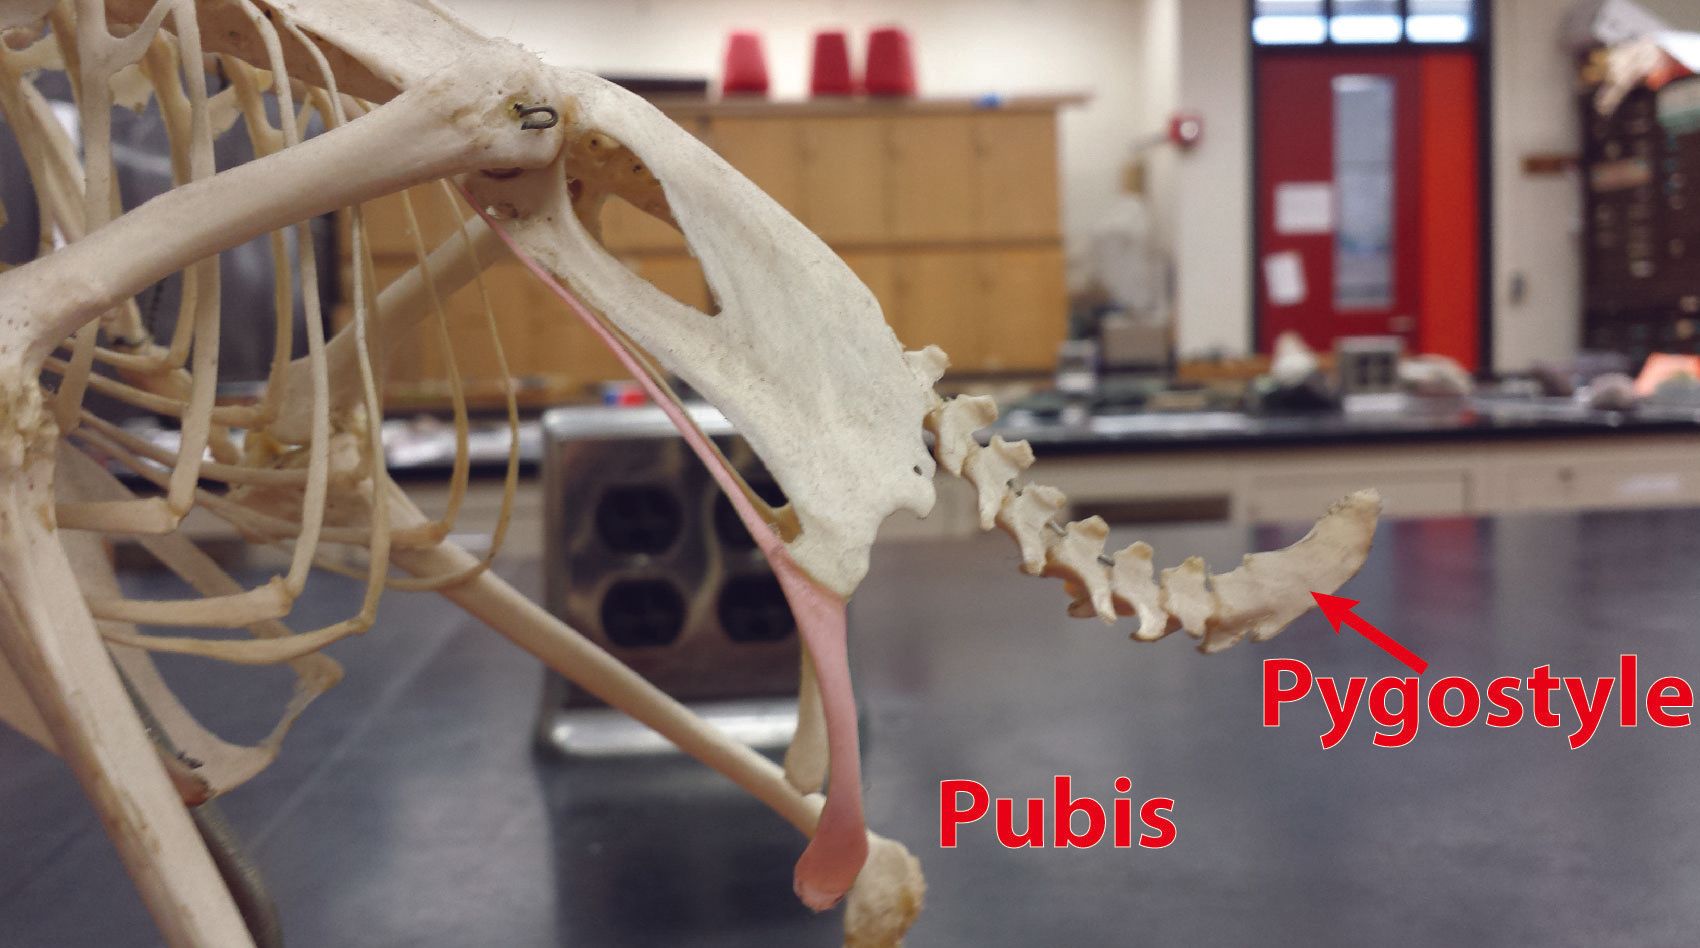 The pelvis of a duck, showing the backward pointing pubis and pygostyle.